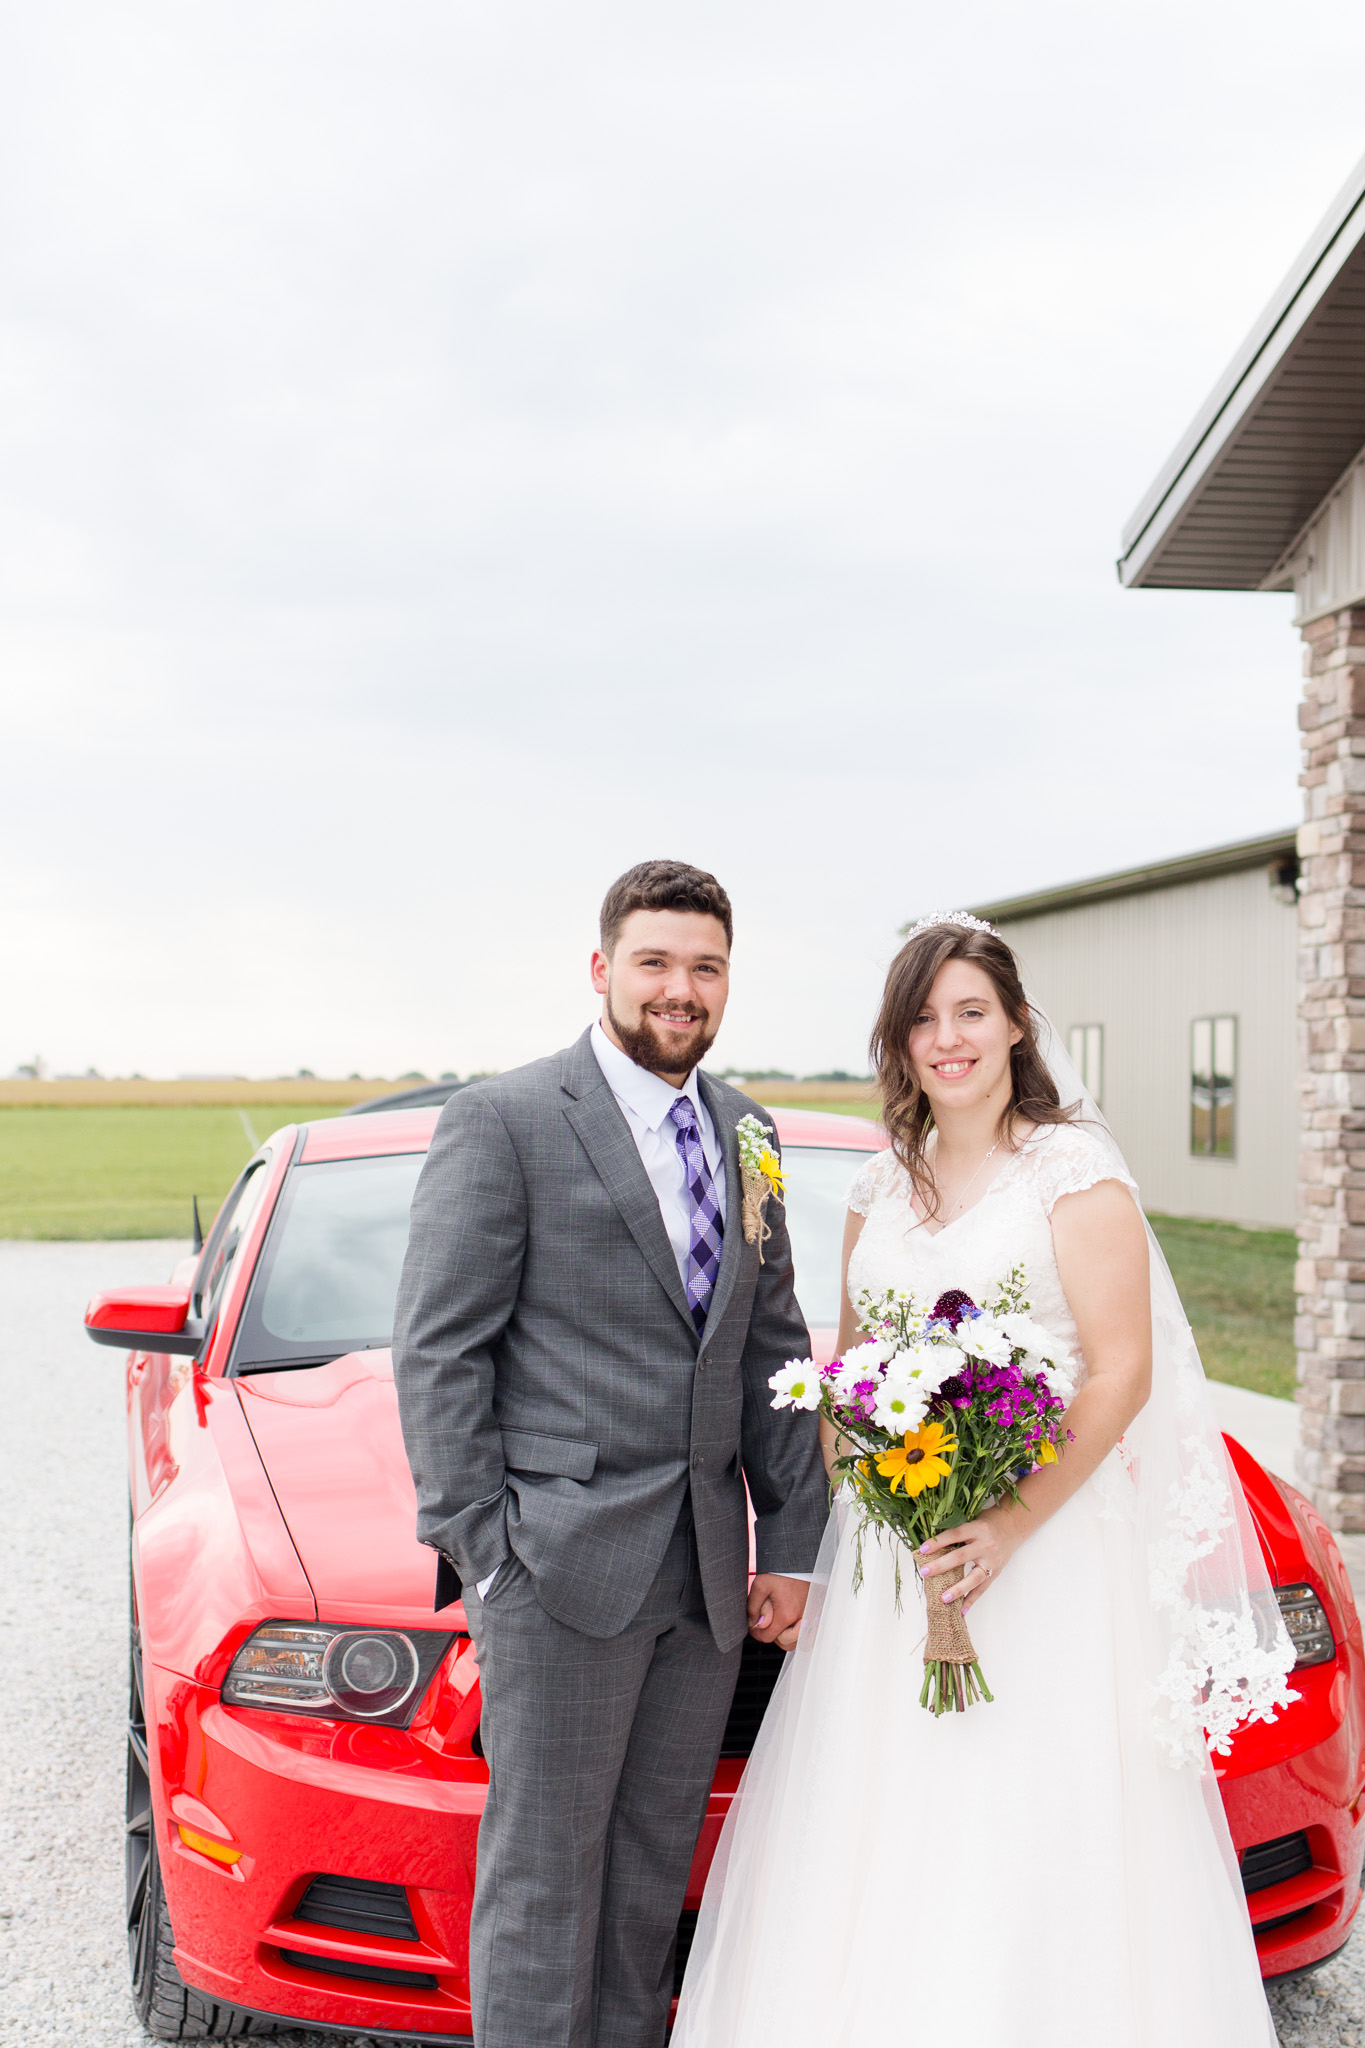 Bride and groom Ford Mustang get away car